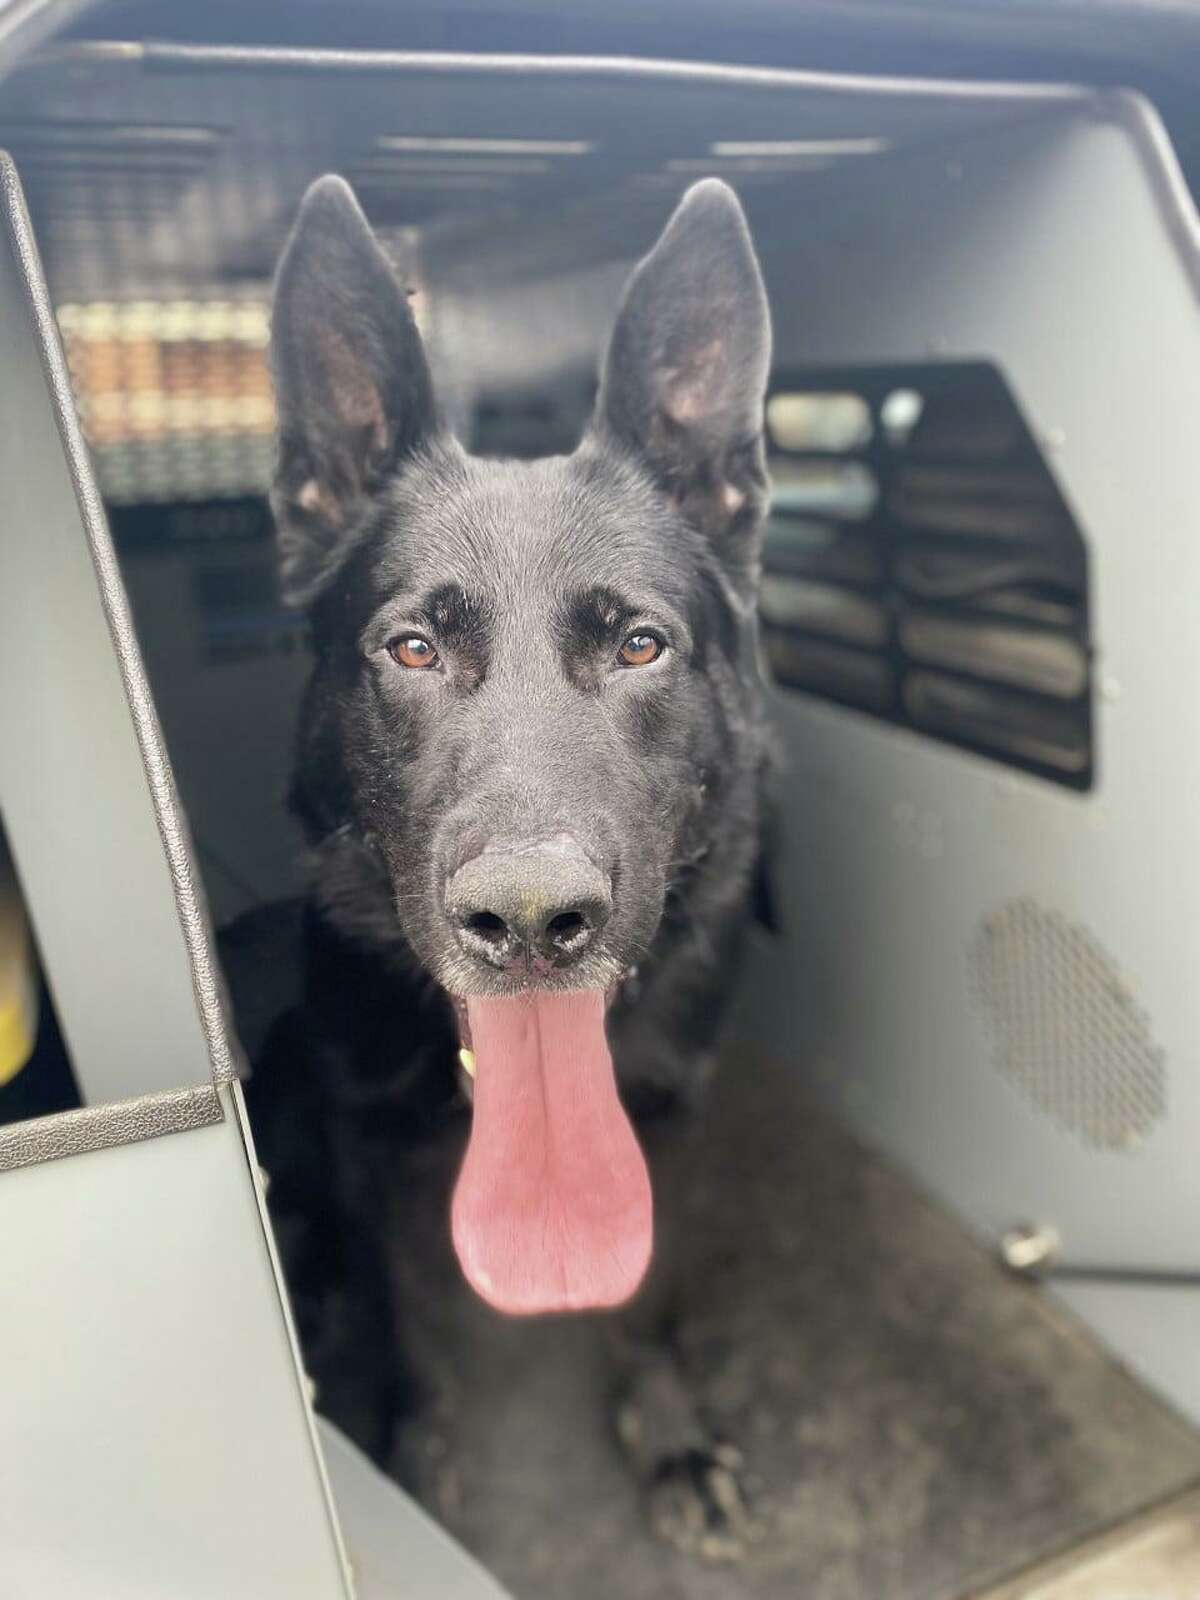 A Brookfield, Conn., police dog helped find a missing juvenile in a neighboring town on Monday, Dec. 27, 2021, police said.